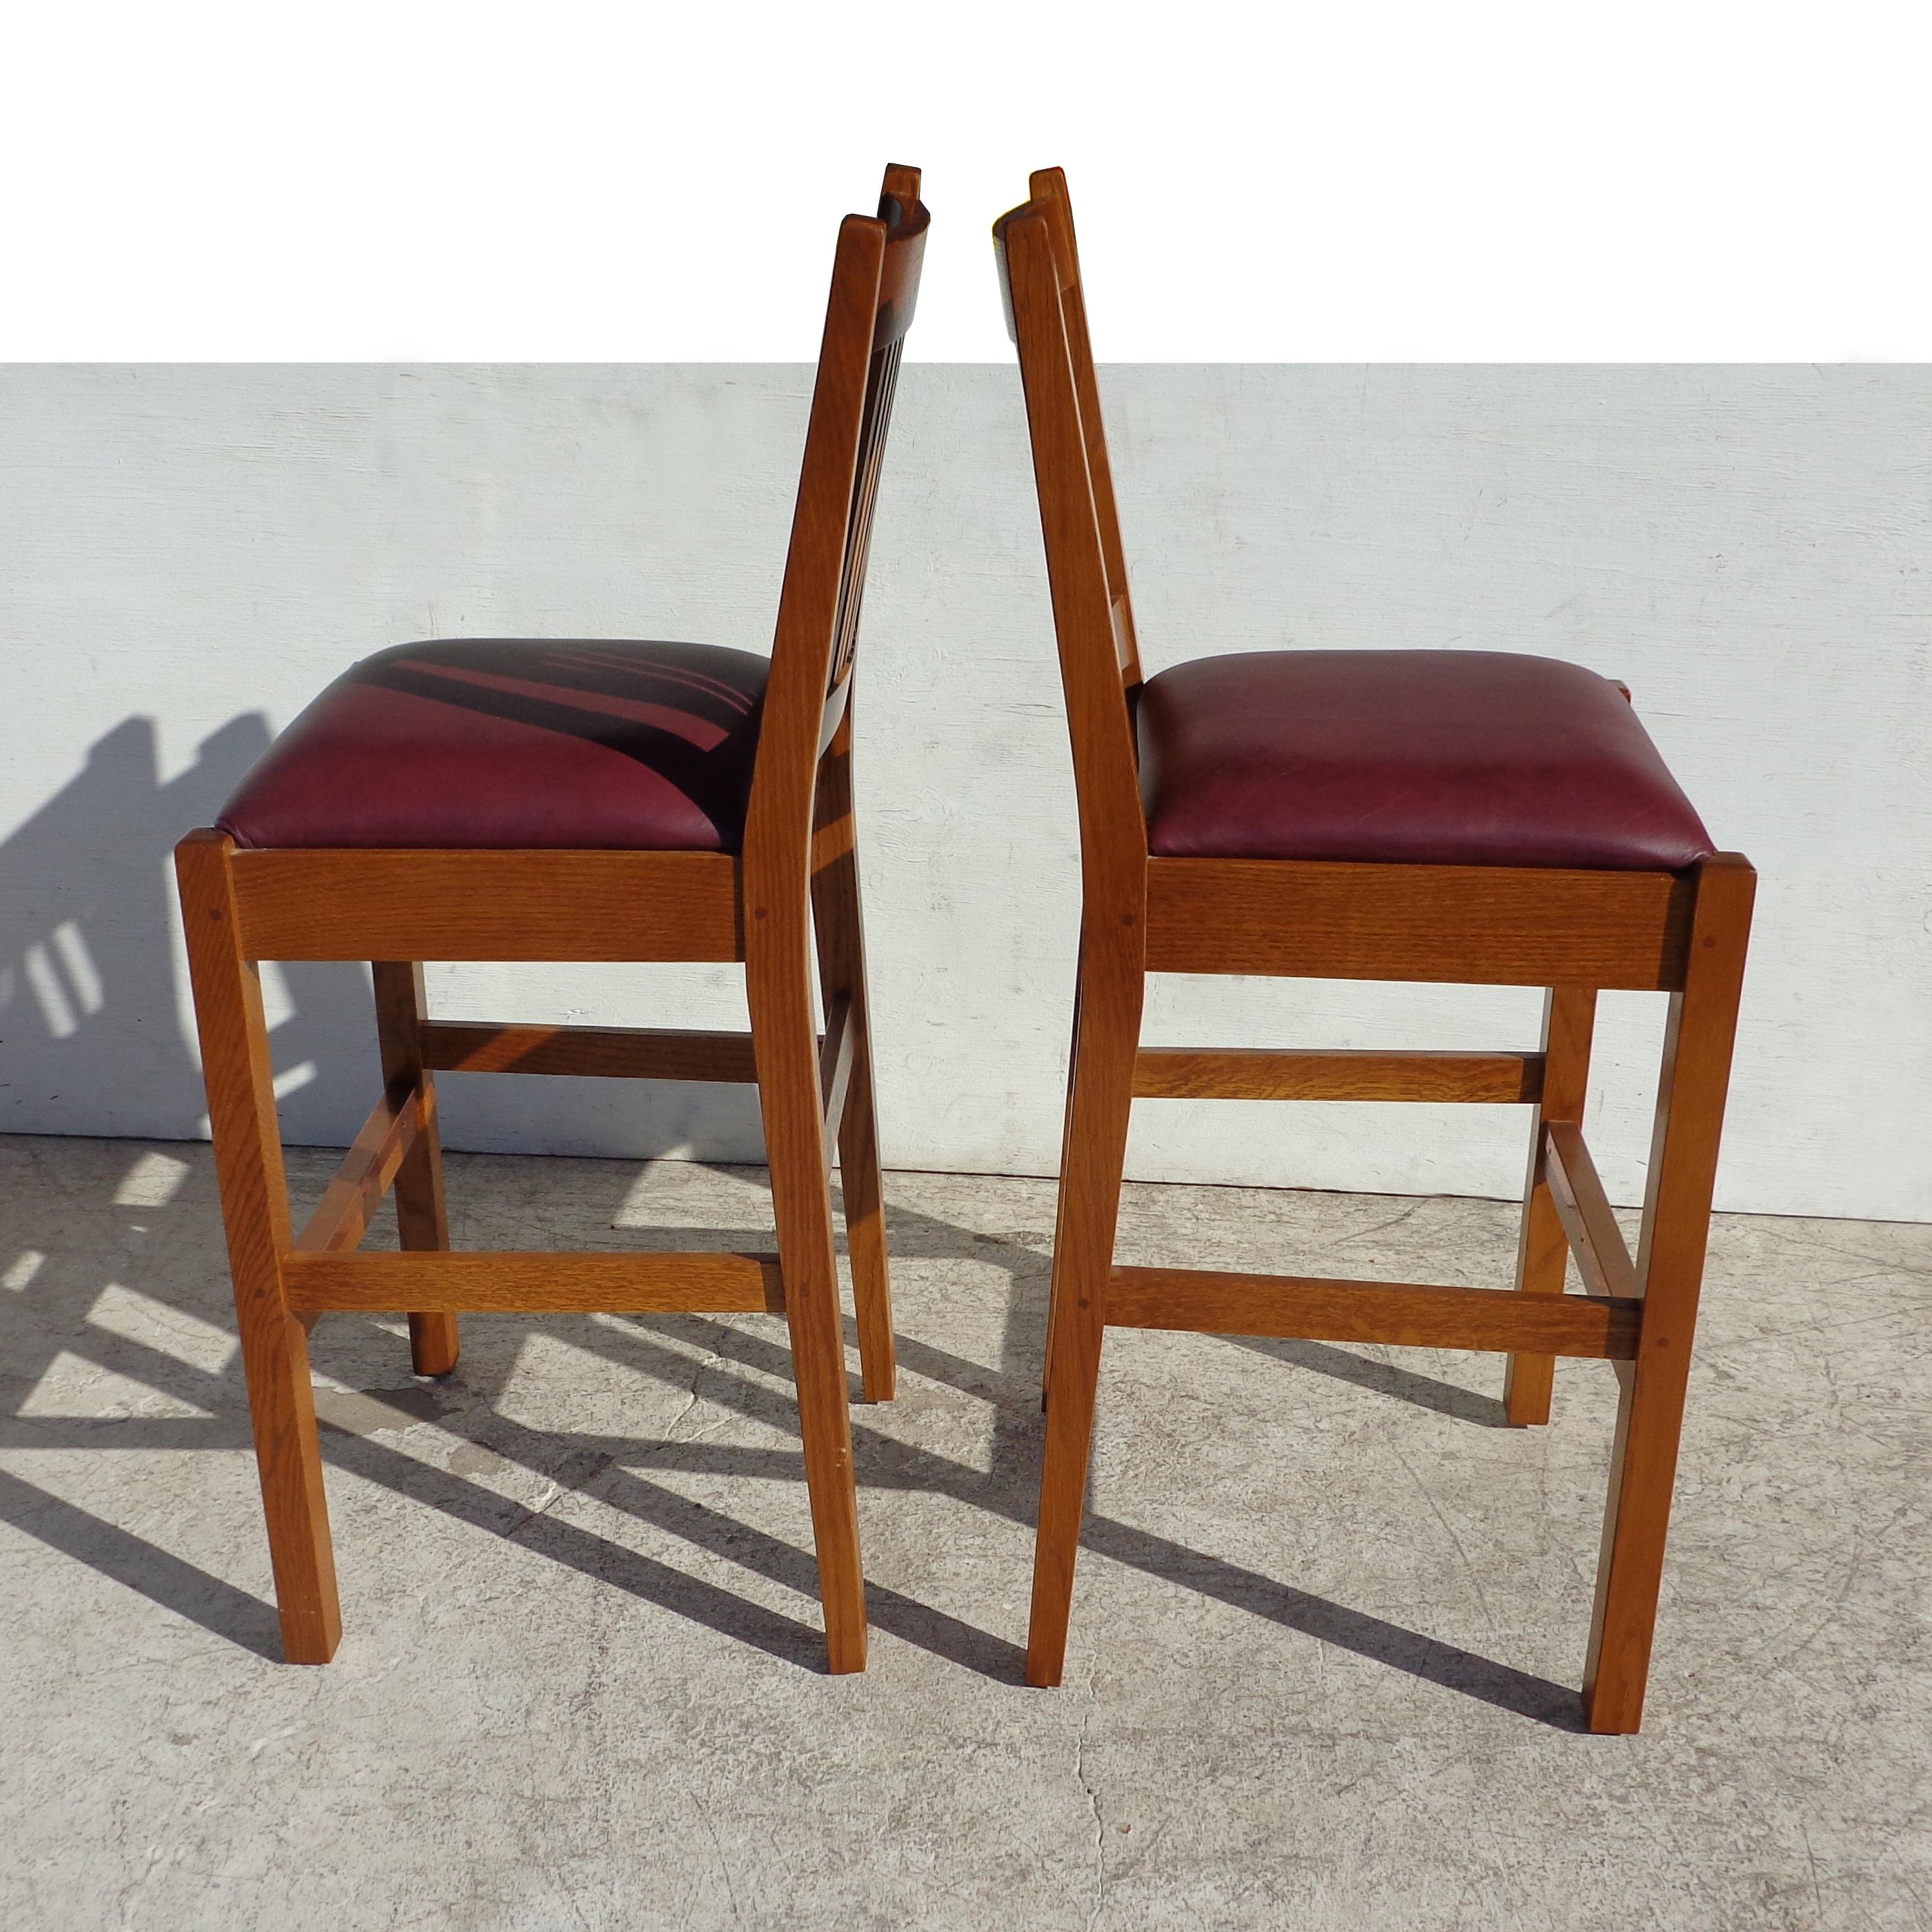 Stickley mission bar stools

A modern configuration of Stickley original Mission designs, this bar stool features Prairie style spindles and a copper covered foot rest. Oak construction.

Measures: 18.5 W in. x 21 D in. x 41.5 H in.
 Seat height: